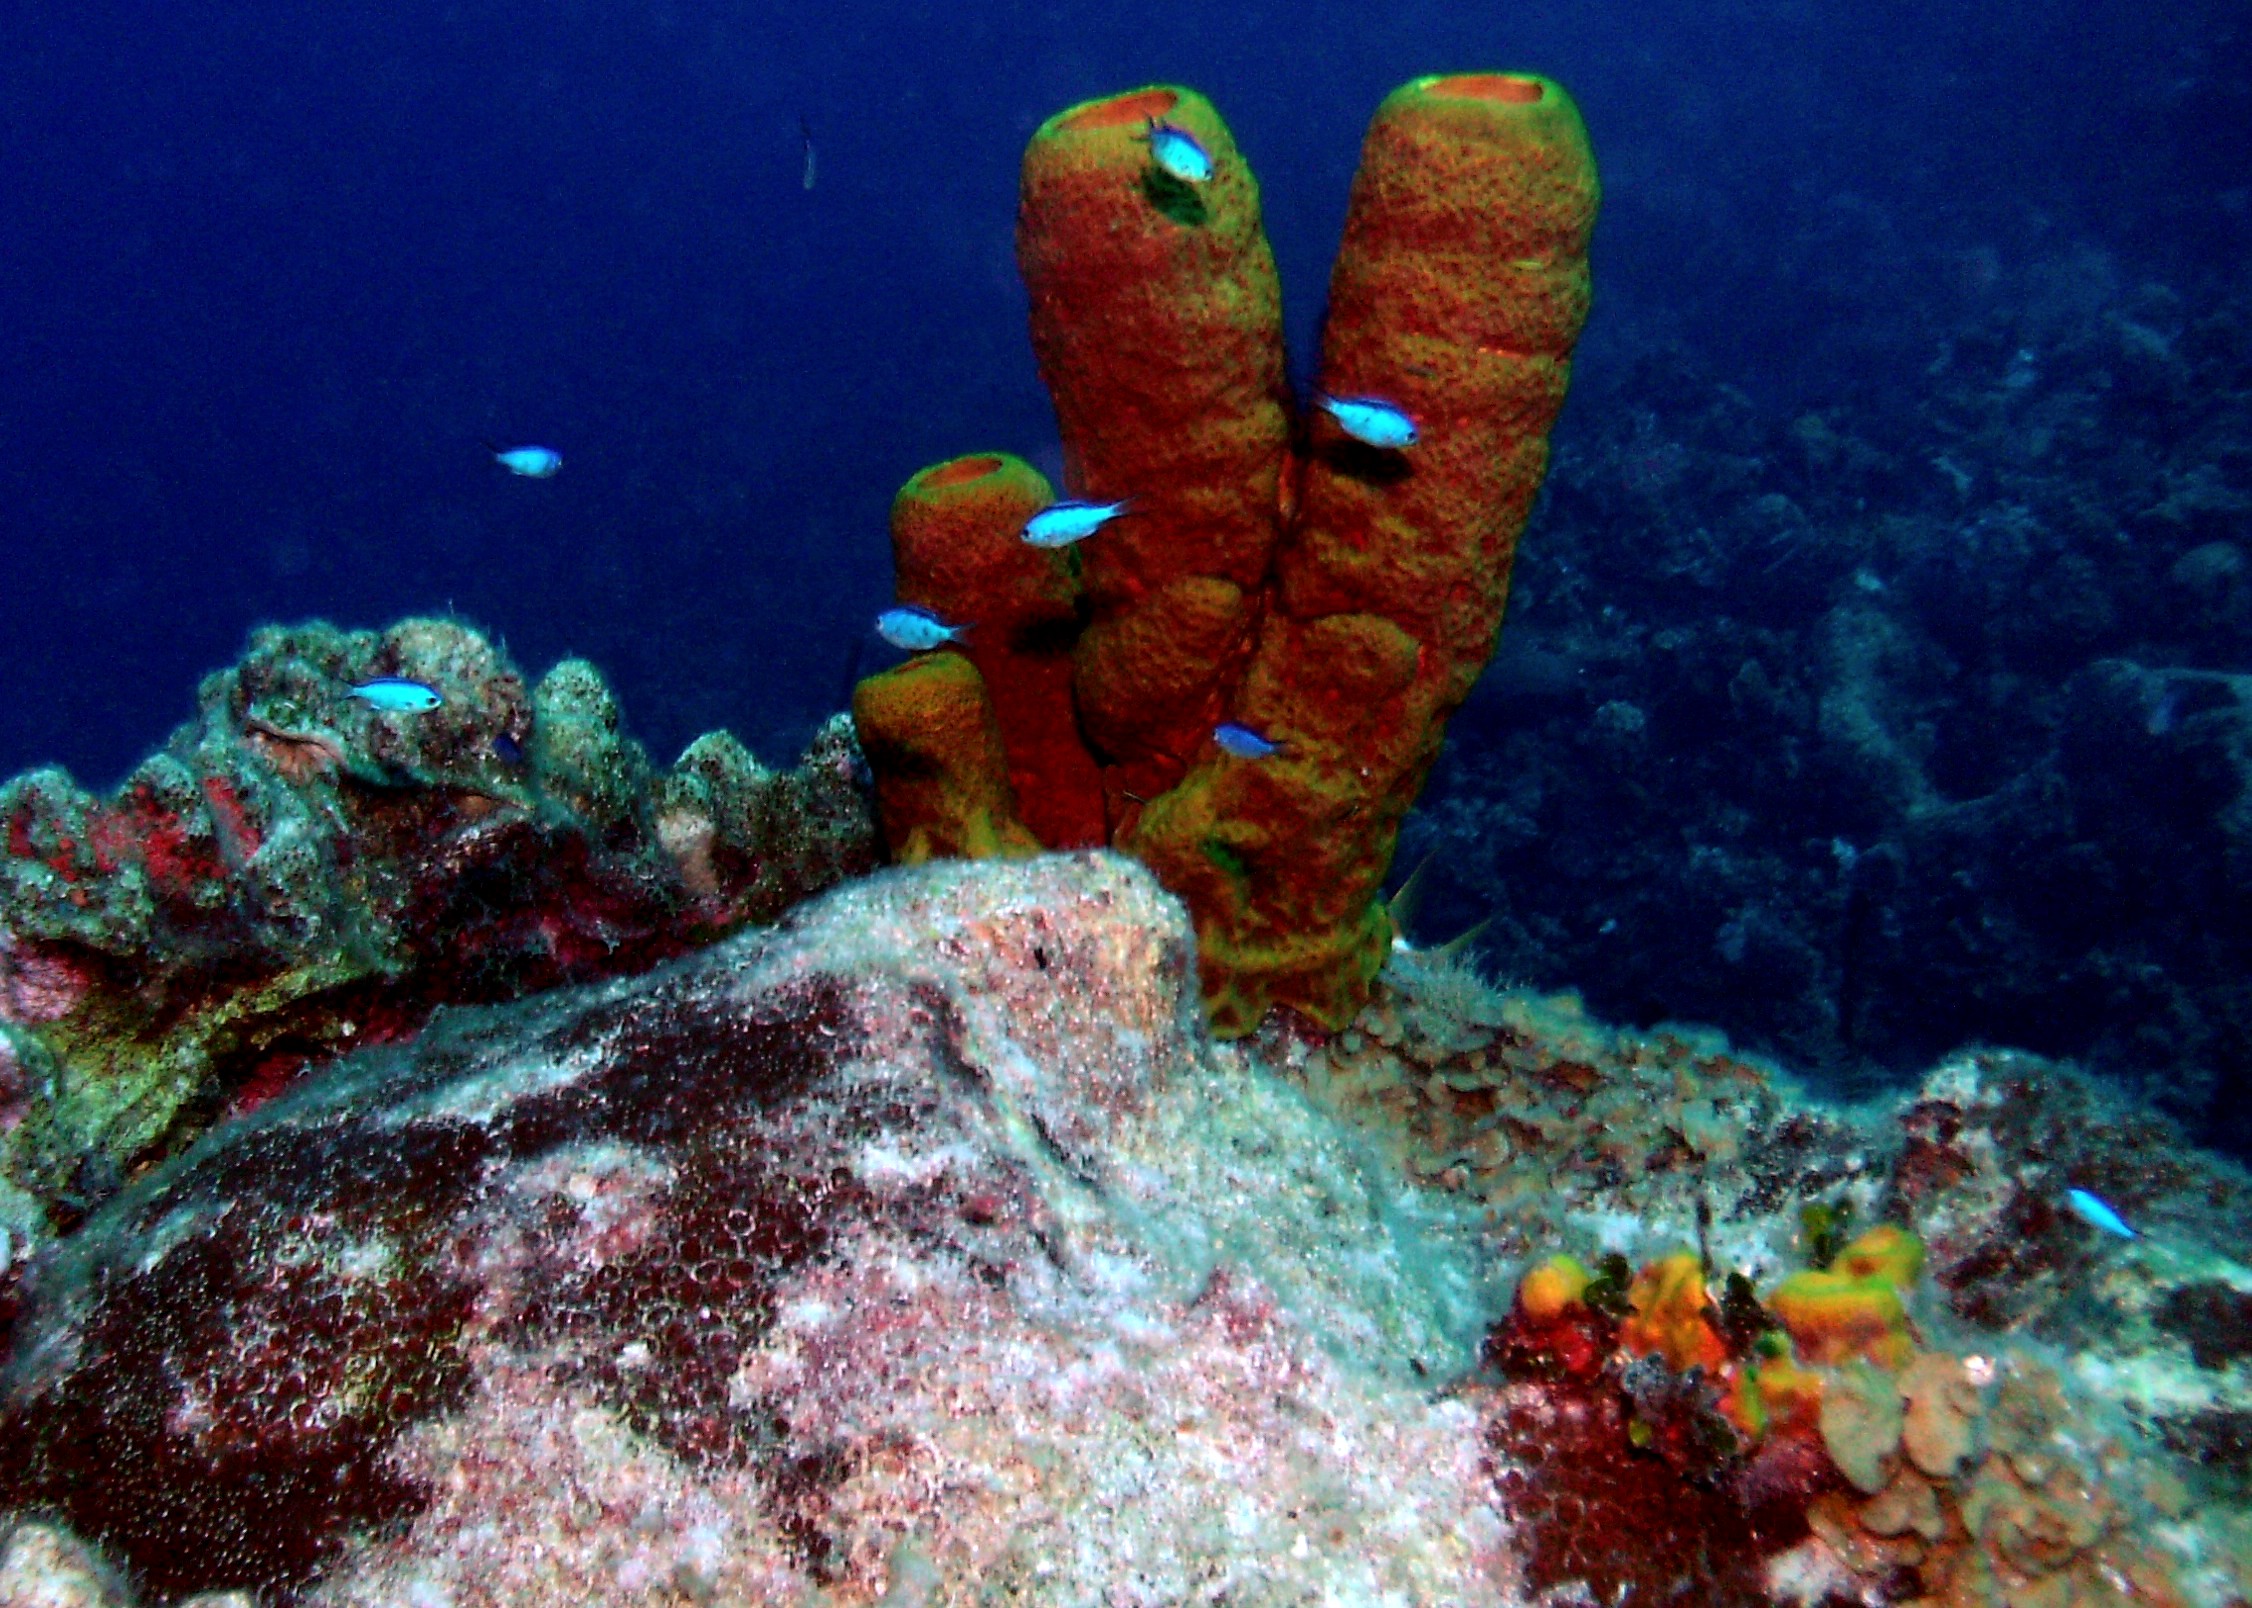 Grand Cayman coral and tube sponges